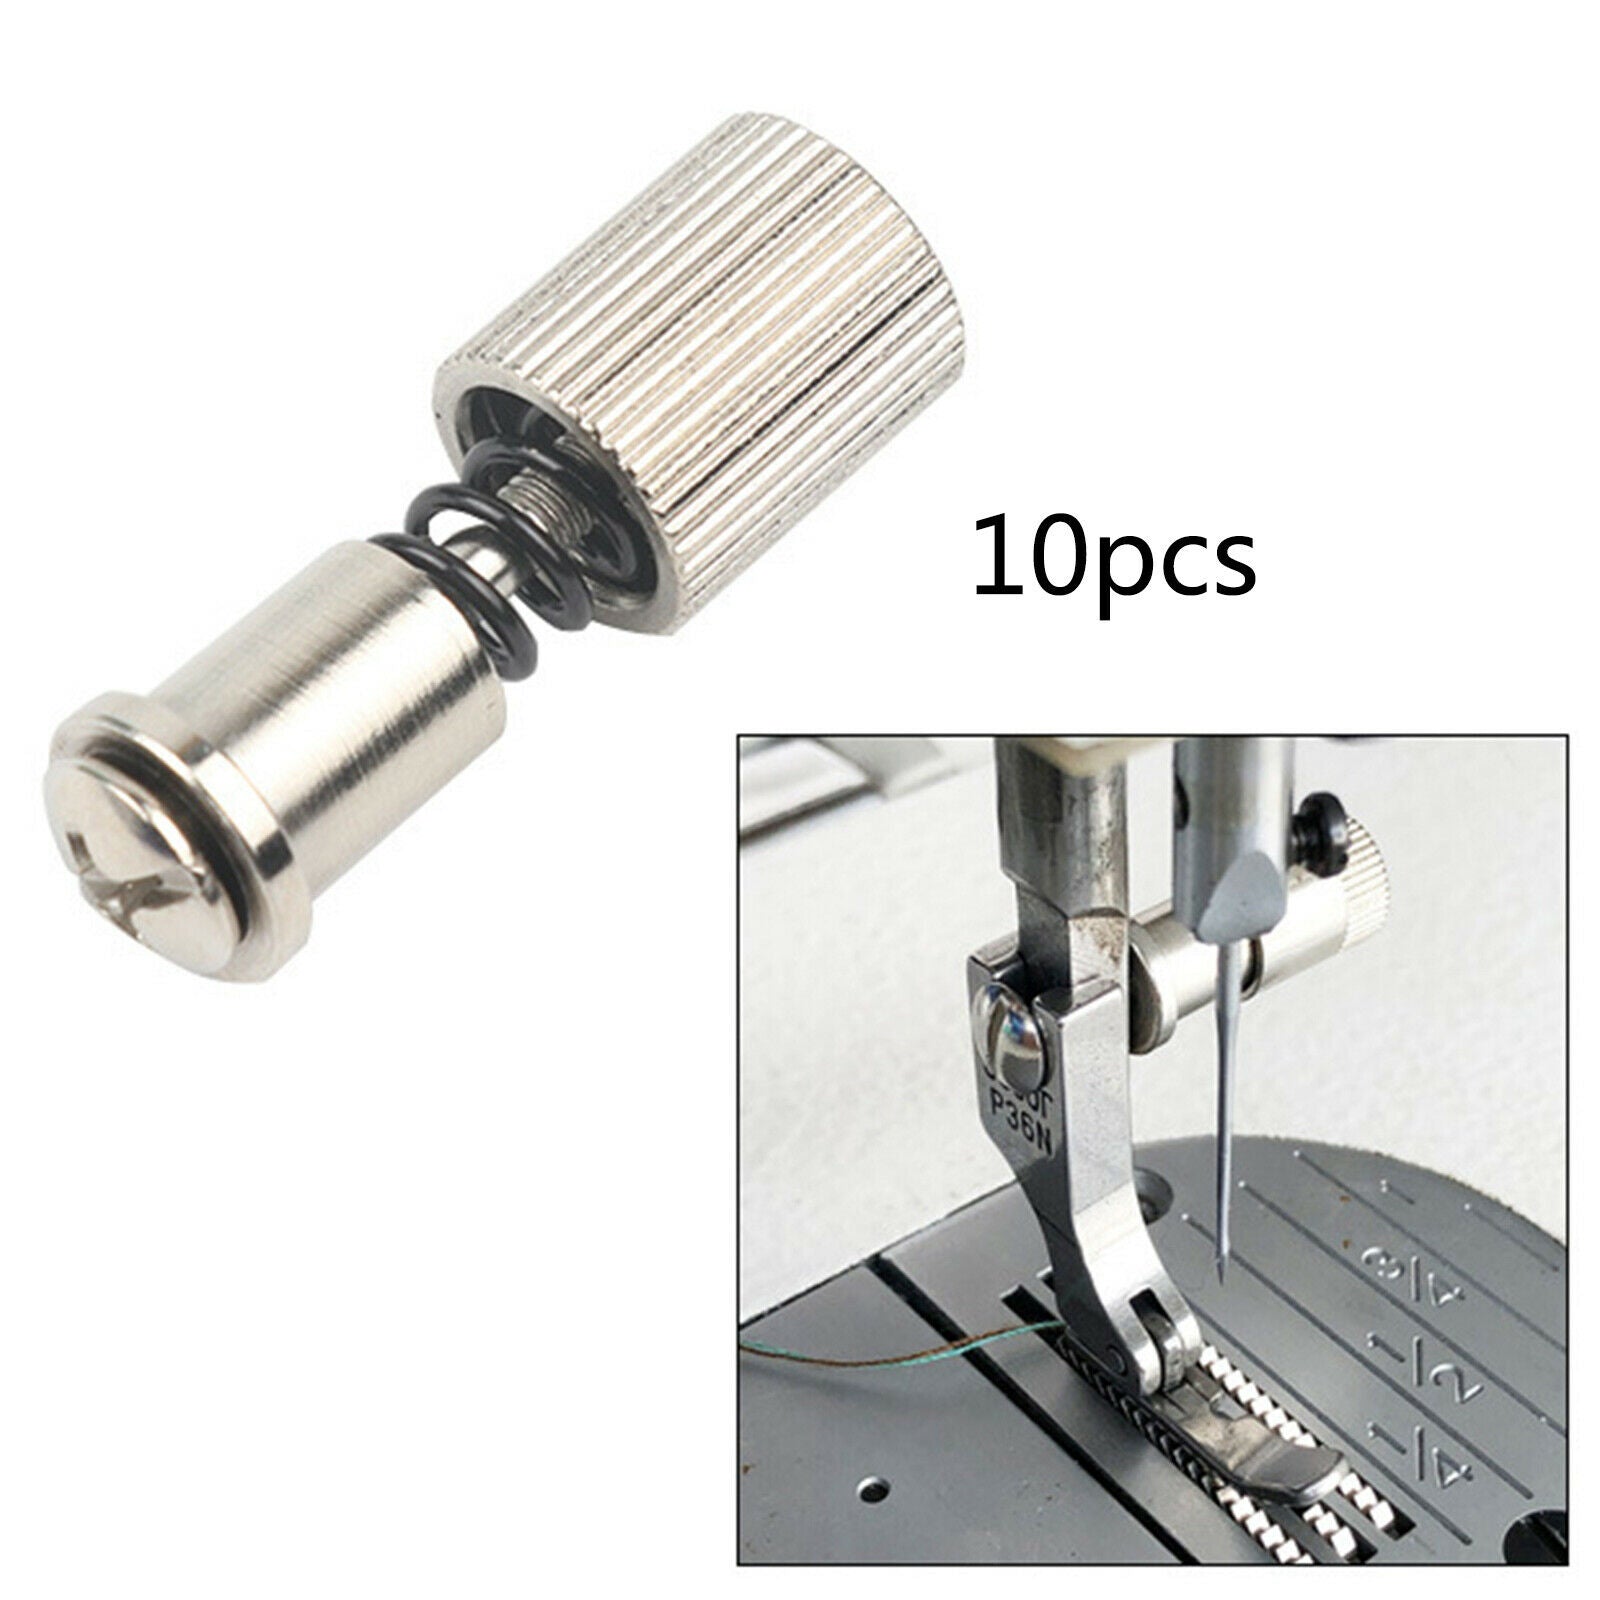 10 pieces quick change spring clip for household sewing machines